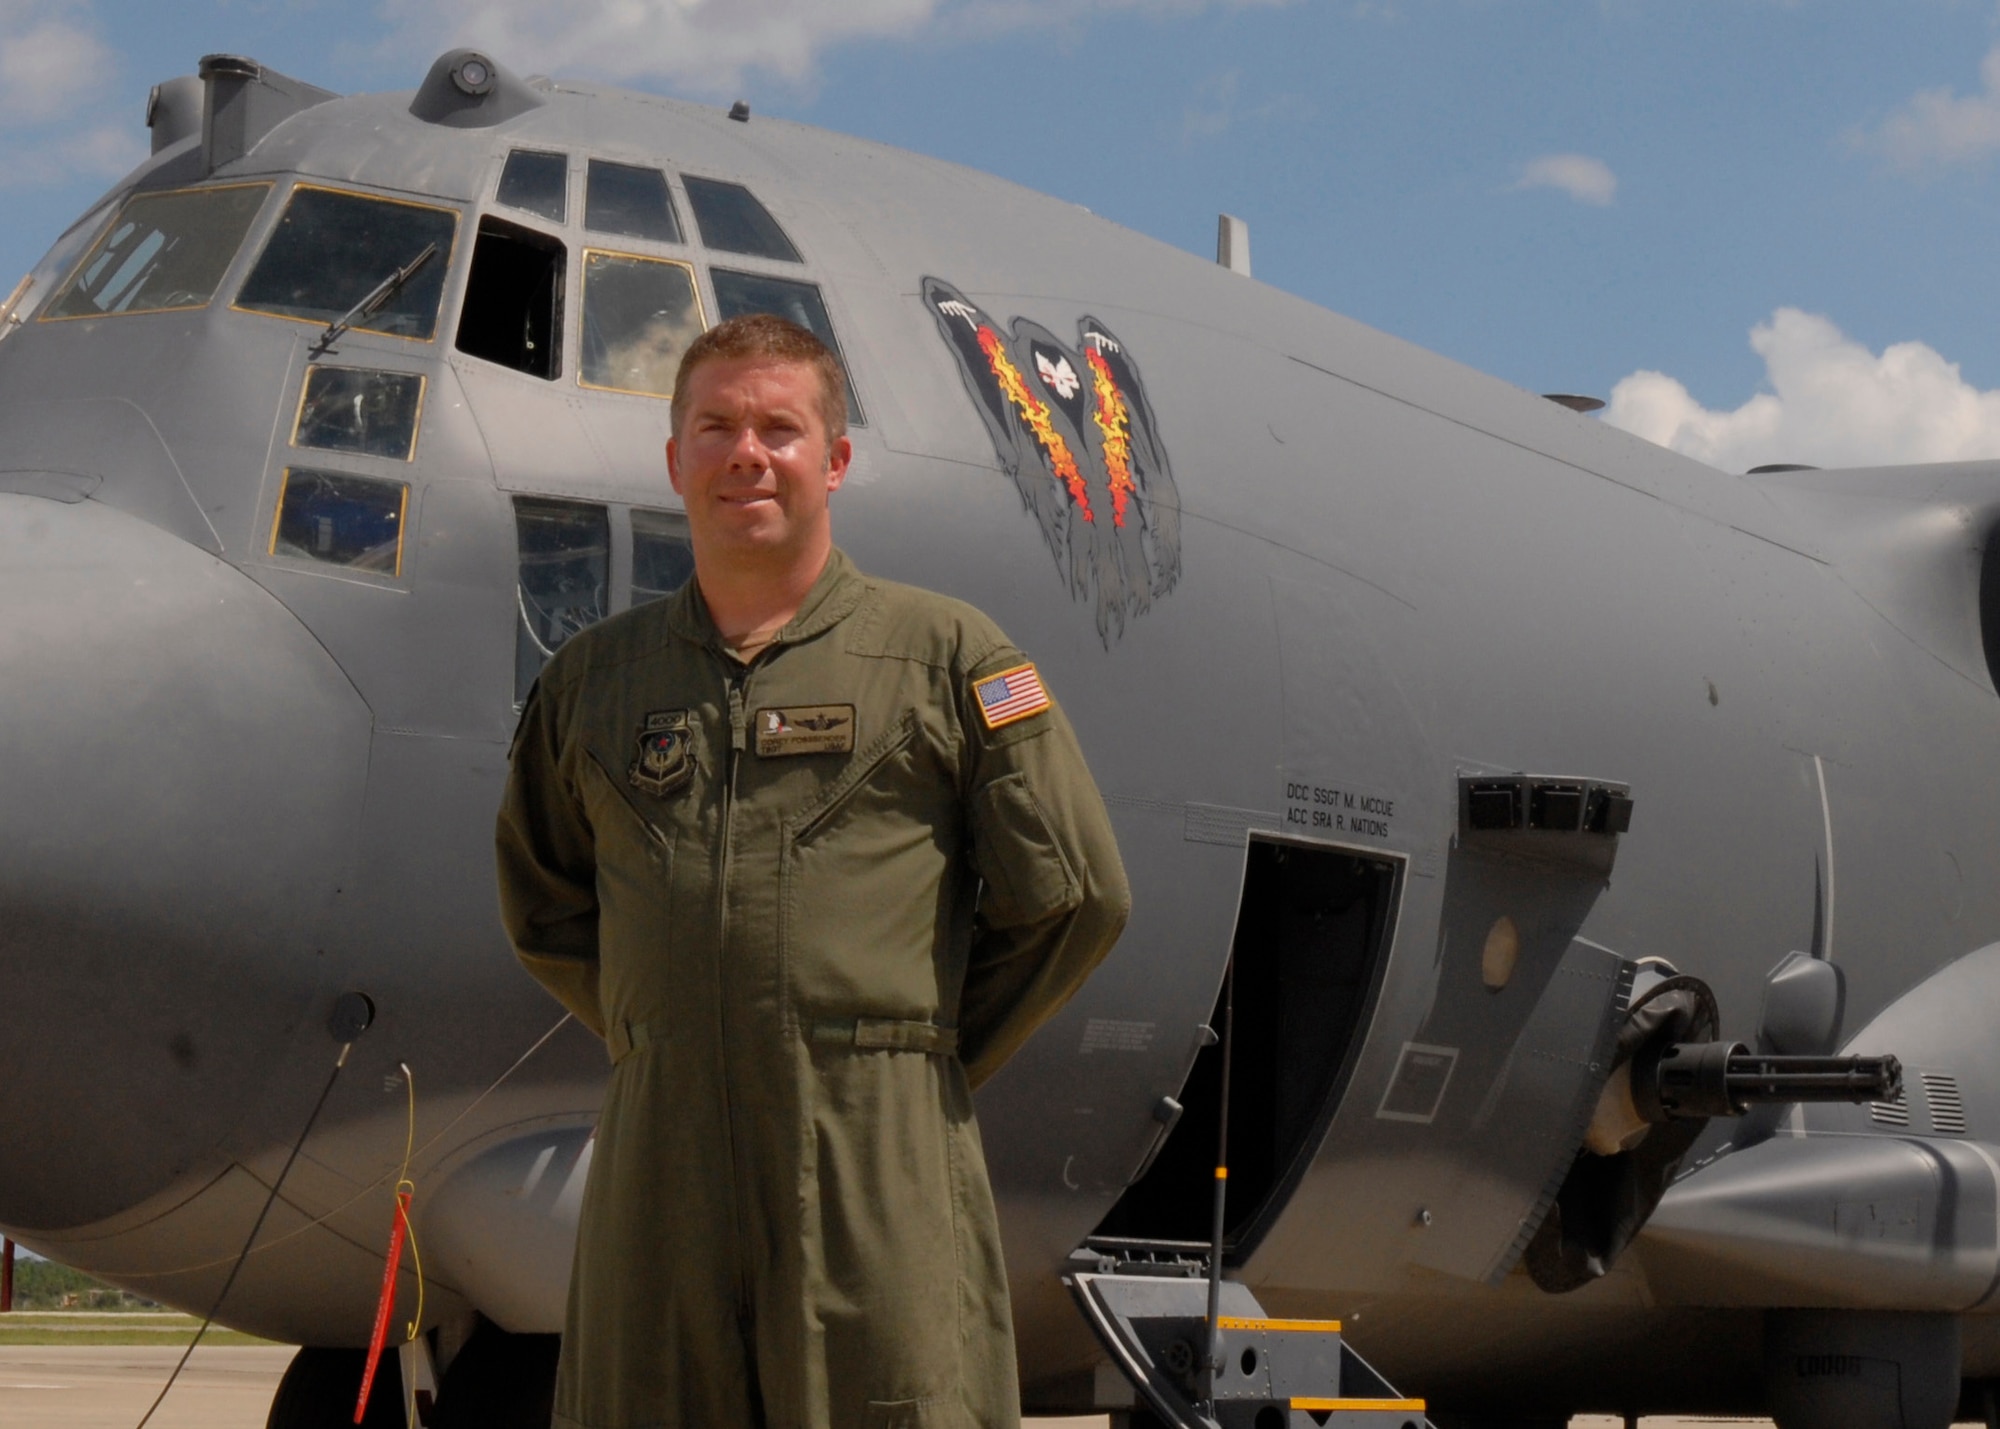 Tech. Sgt. Corey Fossbender, 4th Special Operations Squadron AC-130U Aerial Gunner and Operations Flight NCO in charge, stands next to an AC-130U gunship at Hurlburt Field flightline July 29, 2010. Sergeant Fossbender was selected for this week's "Tip of the Spear" spotlight. ( DoD photo by U.S. Air Force Staff Sgt. Sarah Martinez)

